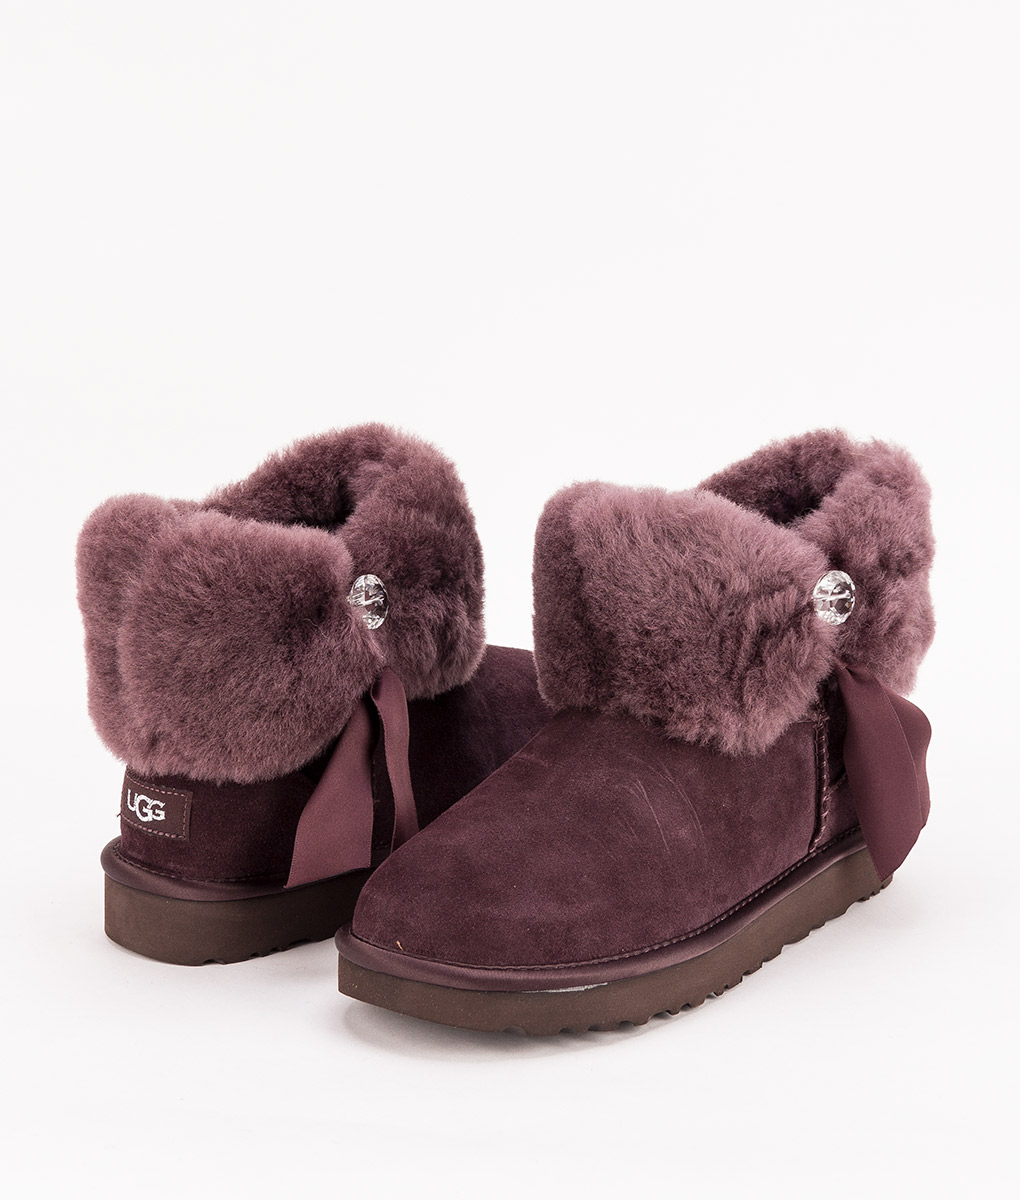 ugg women's ankle boots